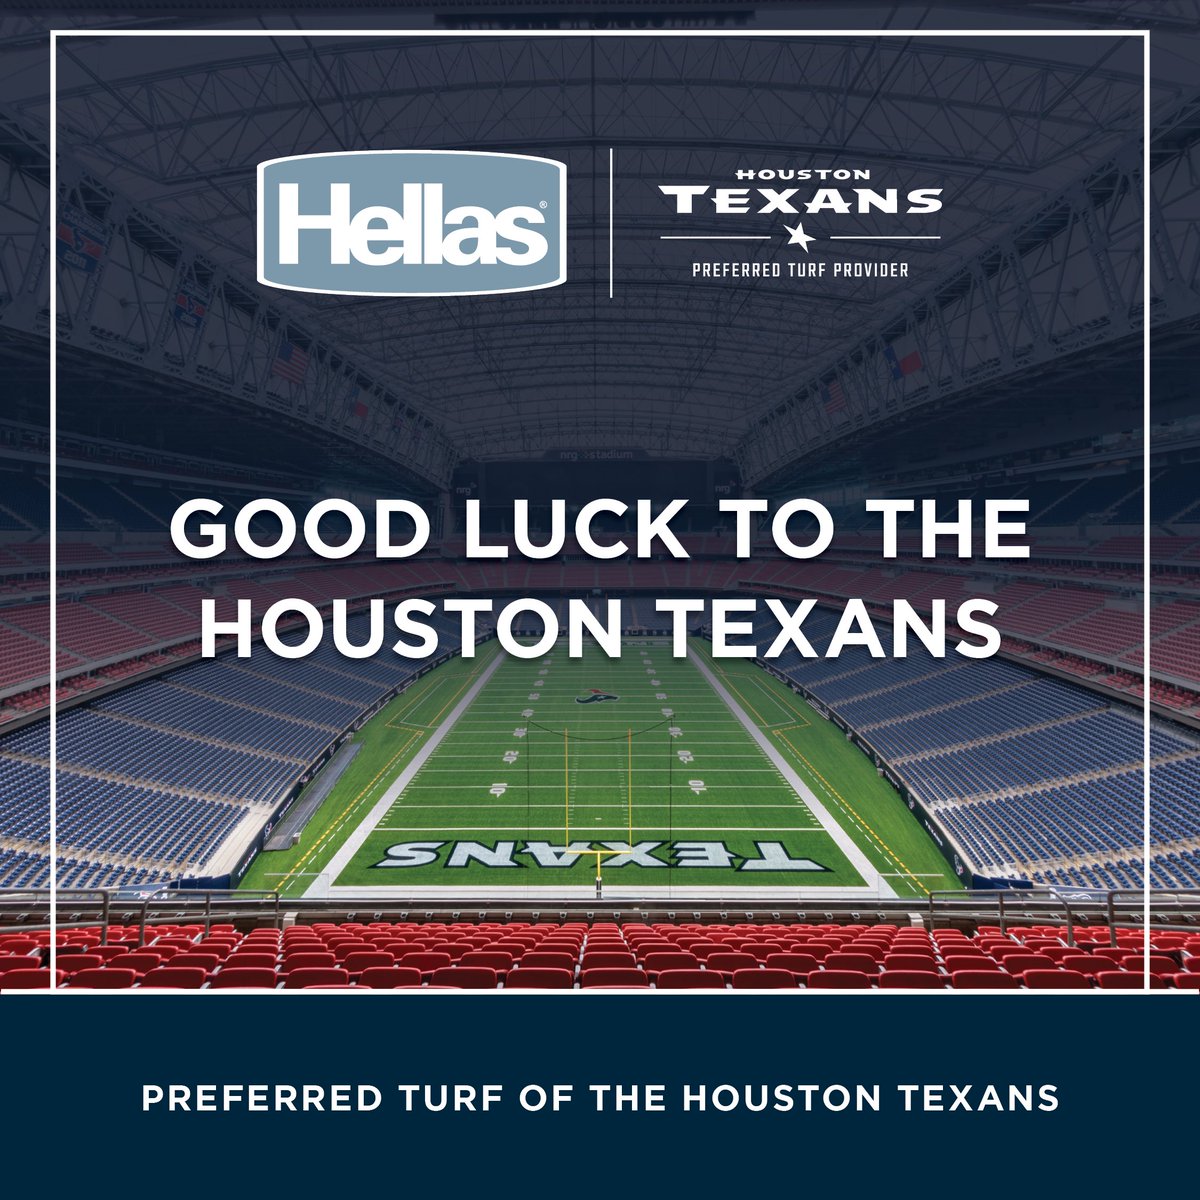 Wishing the Houston Texans the best of luck in their first-round playoff game this weekend! Hellas has provided the Preferred Turf of the Houston Texans for the past 6 years...and looking forward to many more!